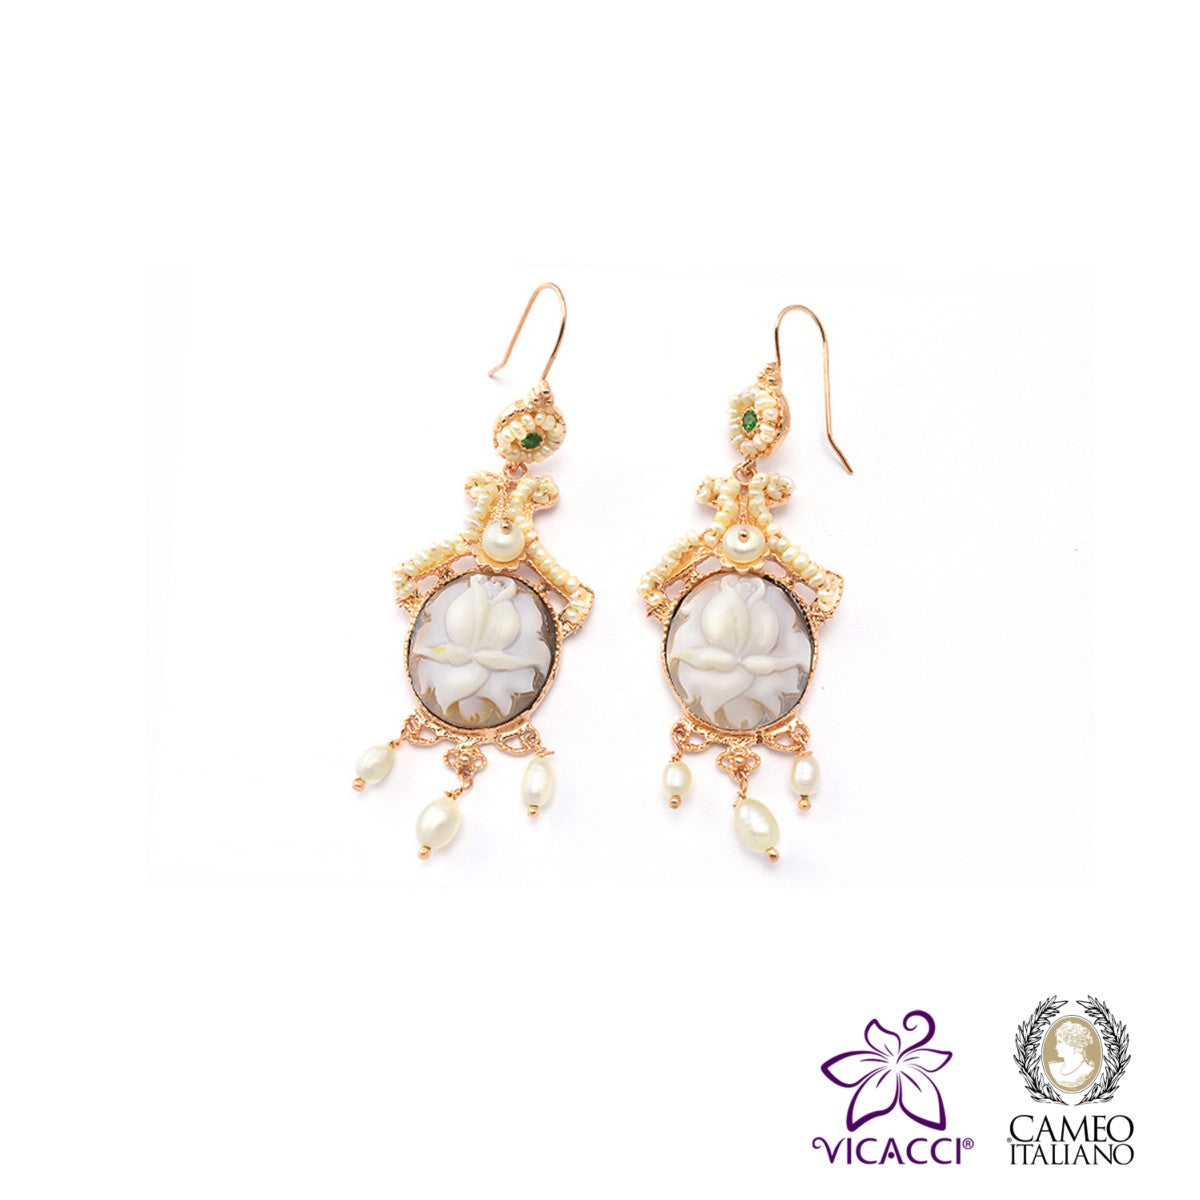 Cameo Italiano, O903 Earrings, 925 Sterling Silver Gold Plated